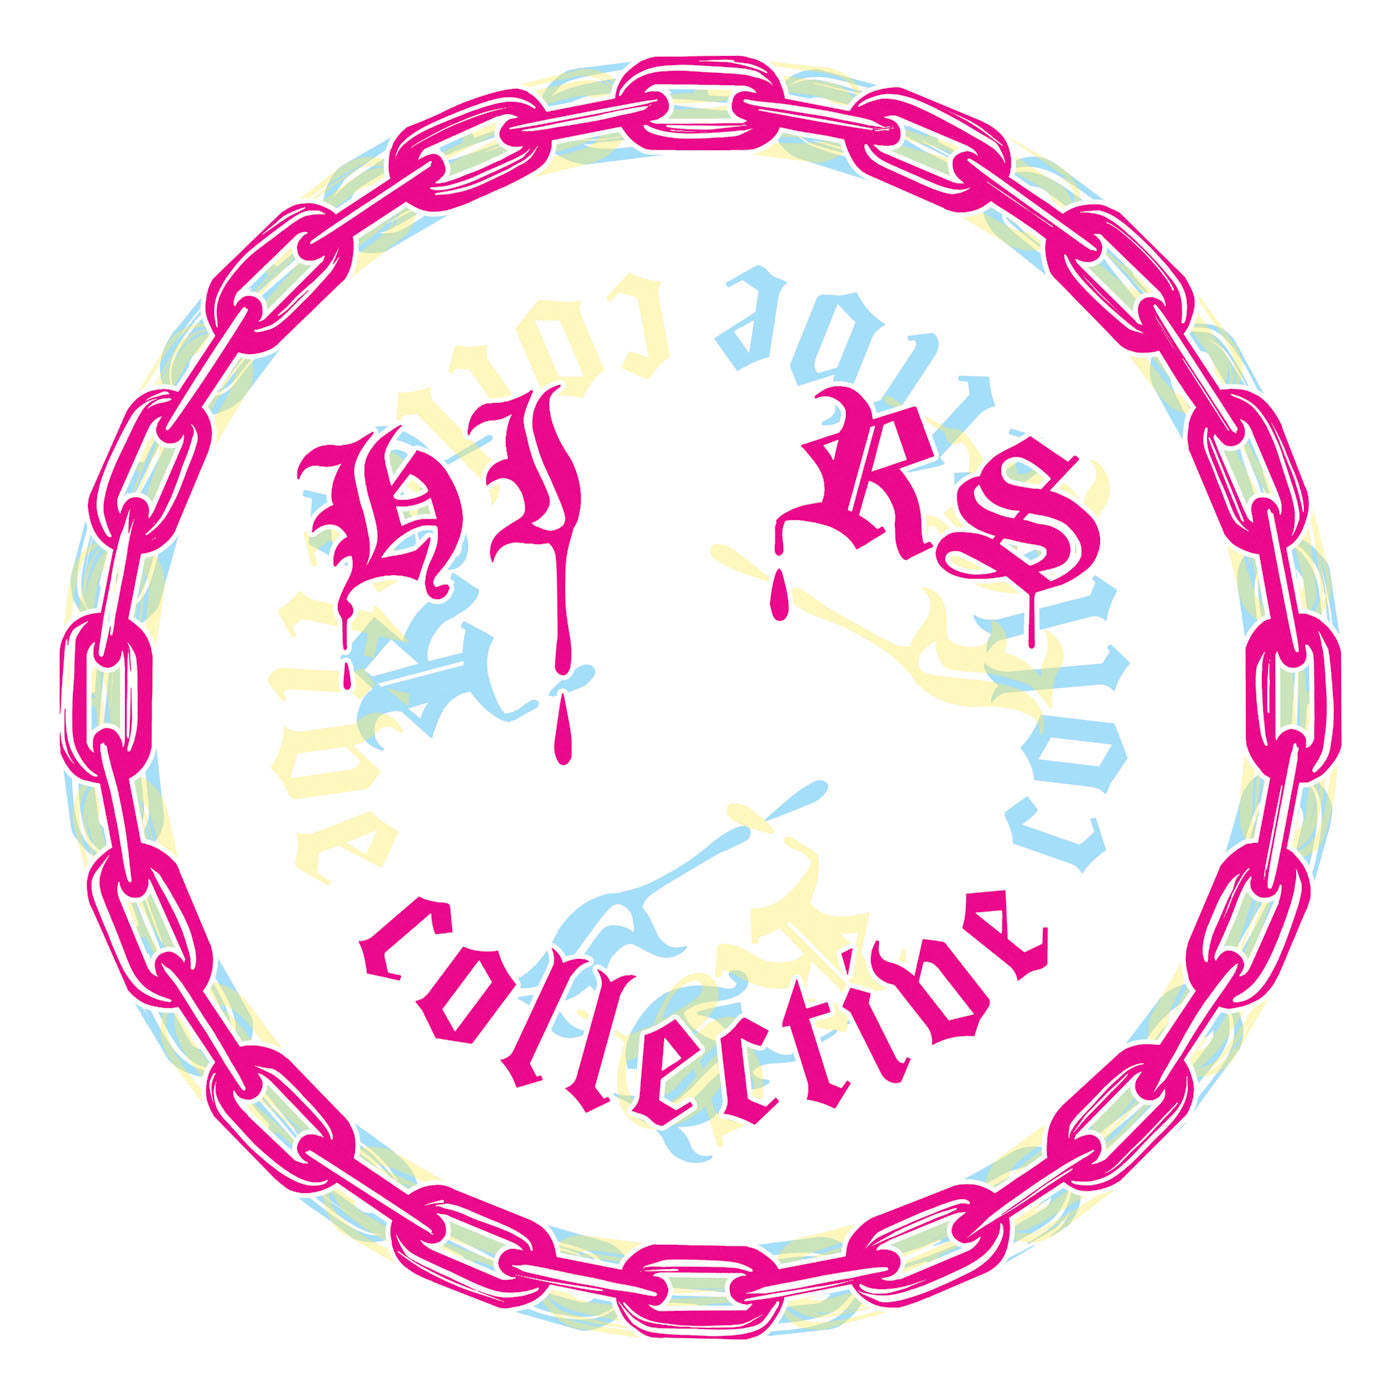 The HIRS Collective - 'The Third 100 Songs'